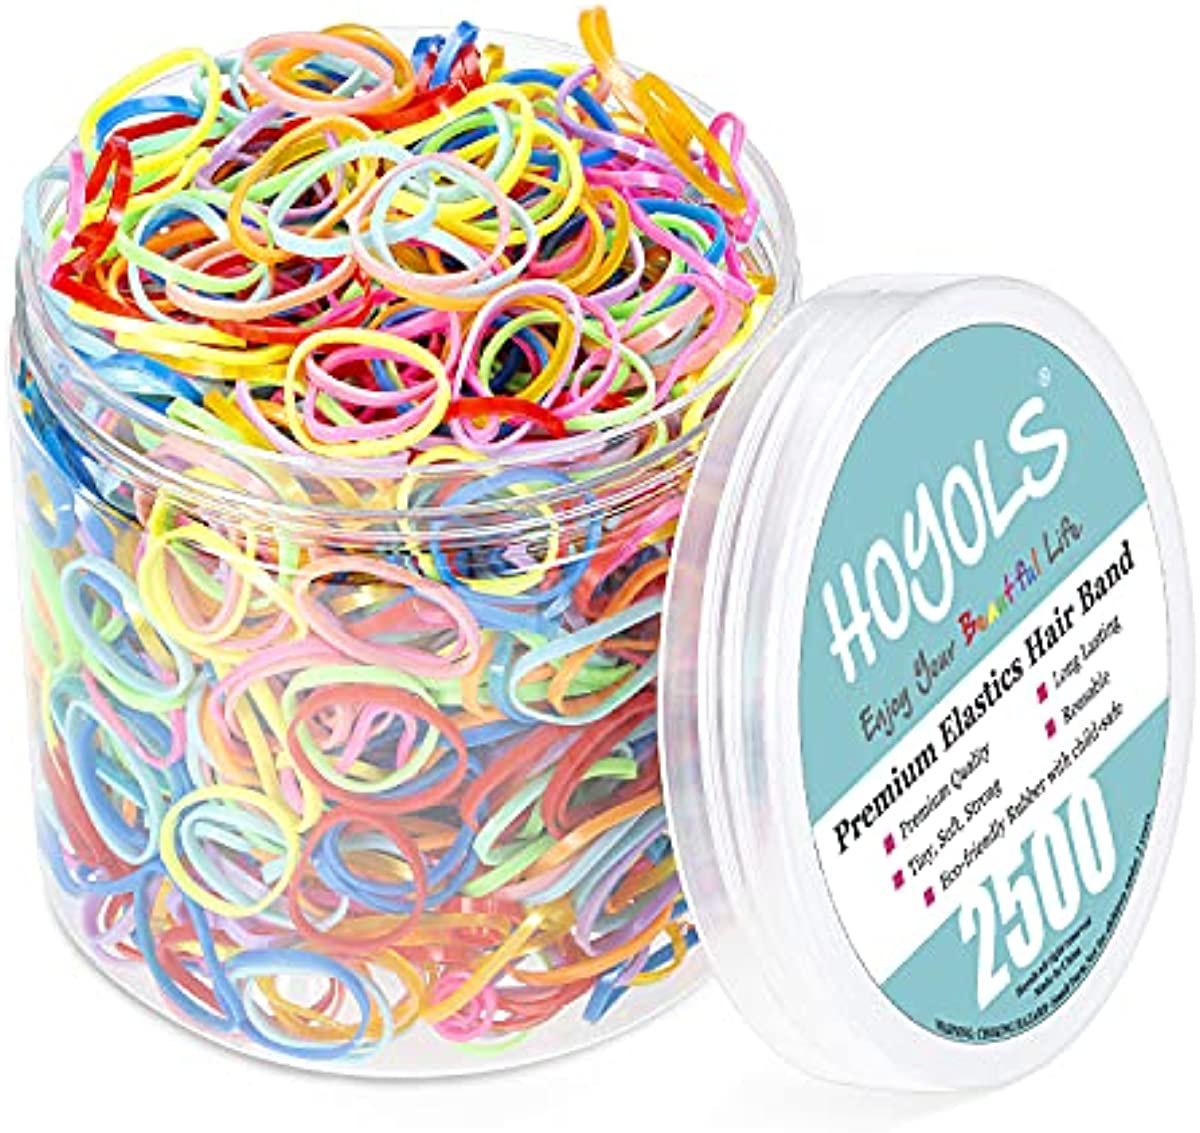 Mixed Color Elastic Hair Bands, 2500 Small Rubber Bands Braids for Girls Kids Women Non-Slip Tiny Soft Hair Ties Braiding Hair Accessories Value Pack Colorful Hoyols